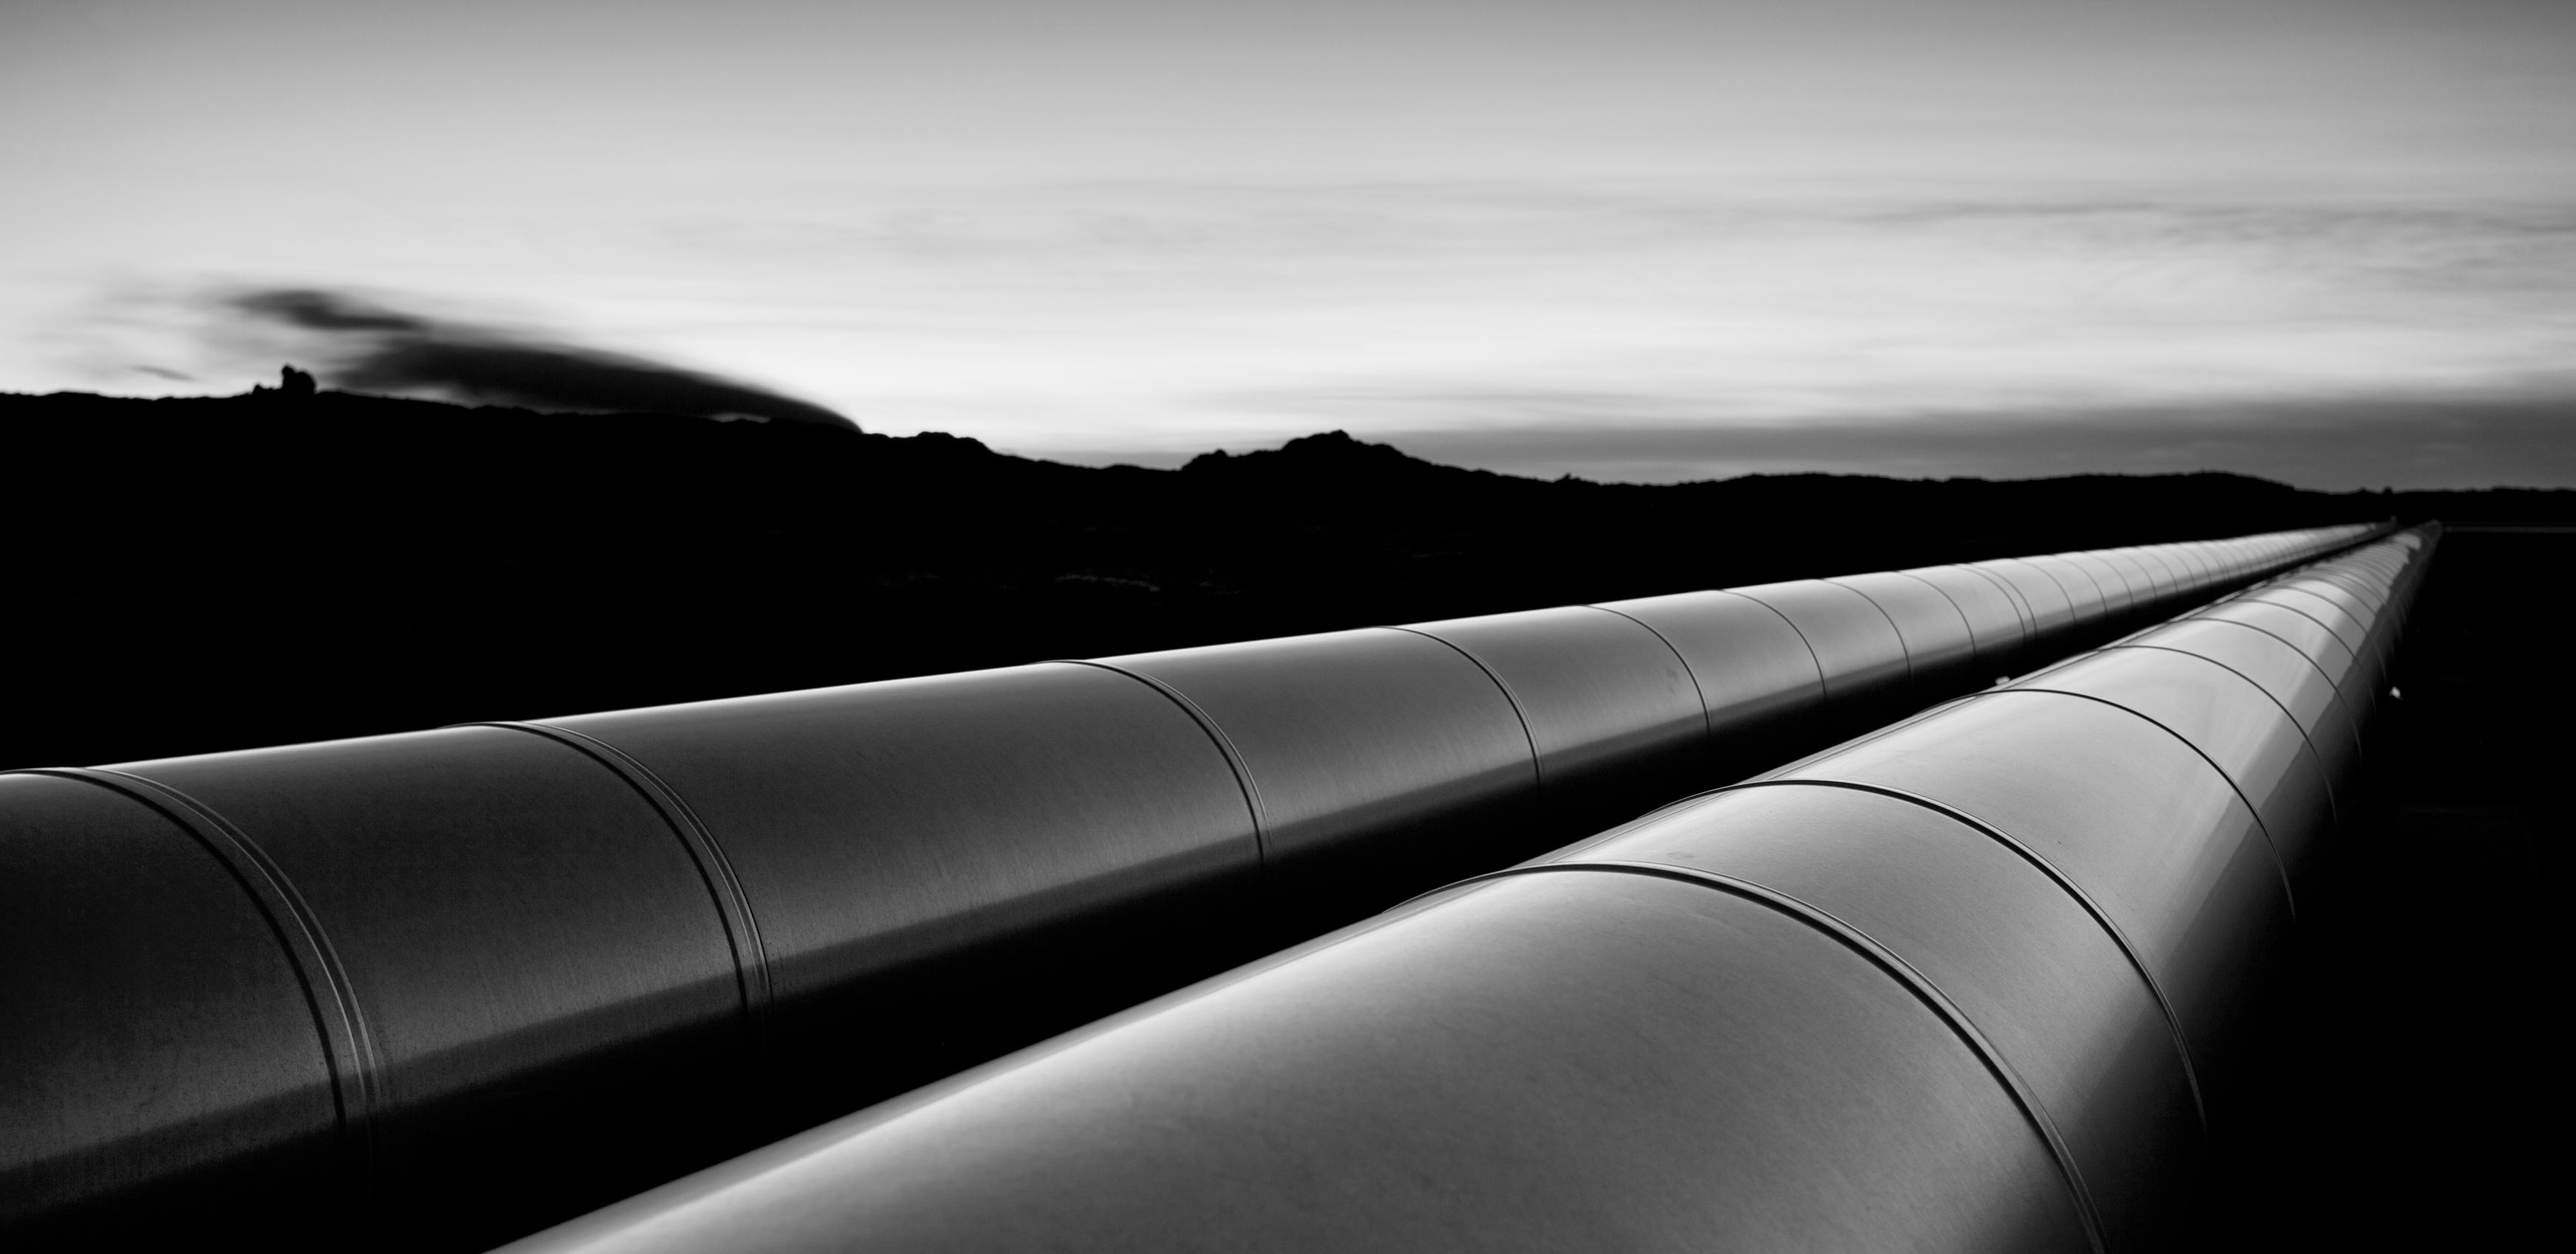 Two large shiny metal pipes from Reykjanesvirkjun geothermal power station in Iceland.